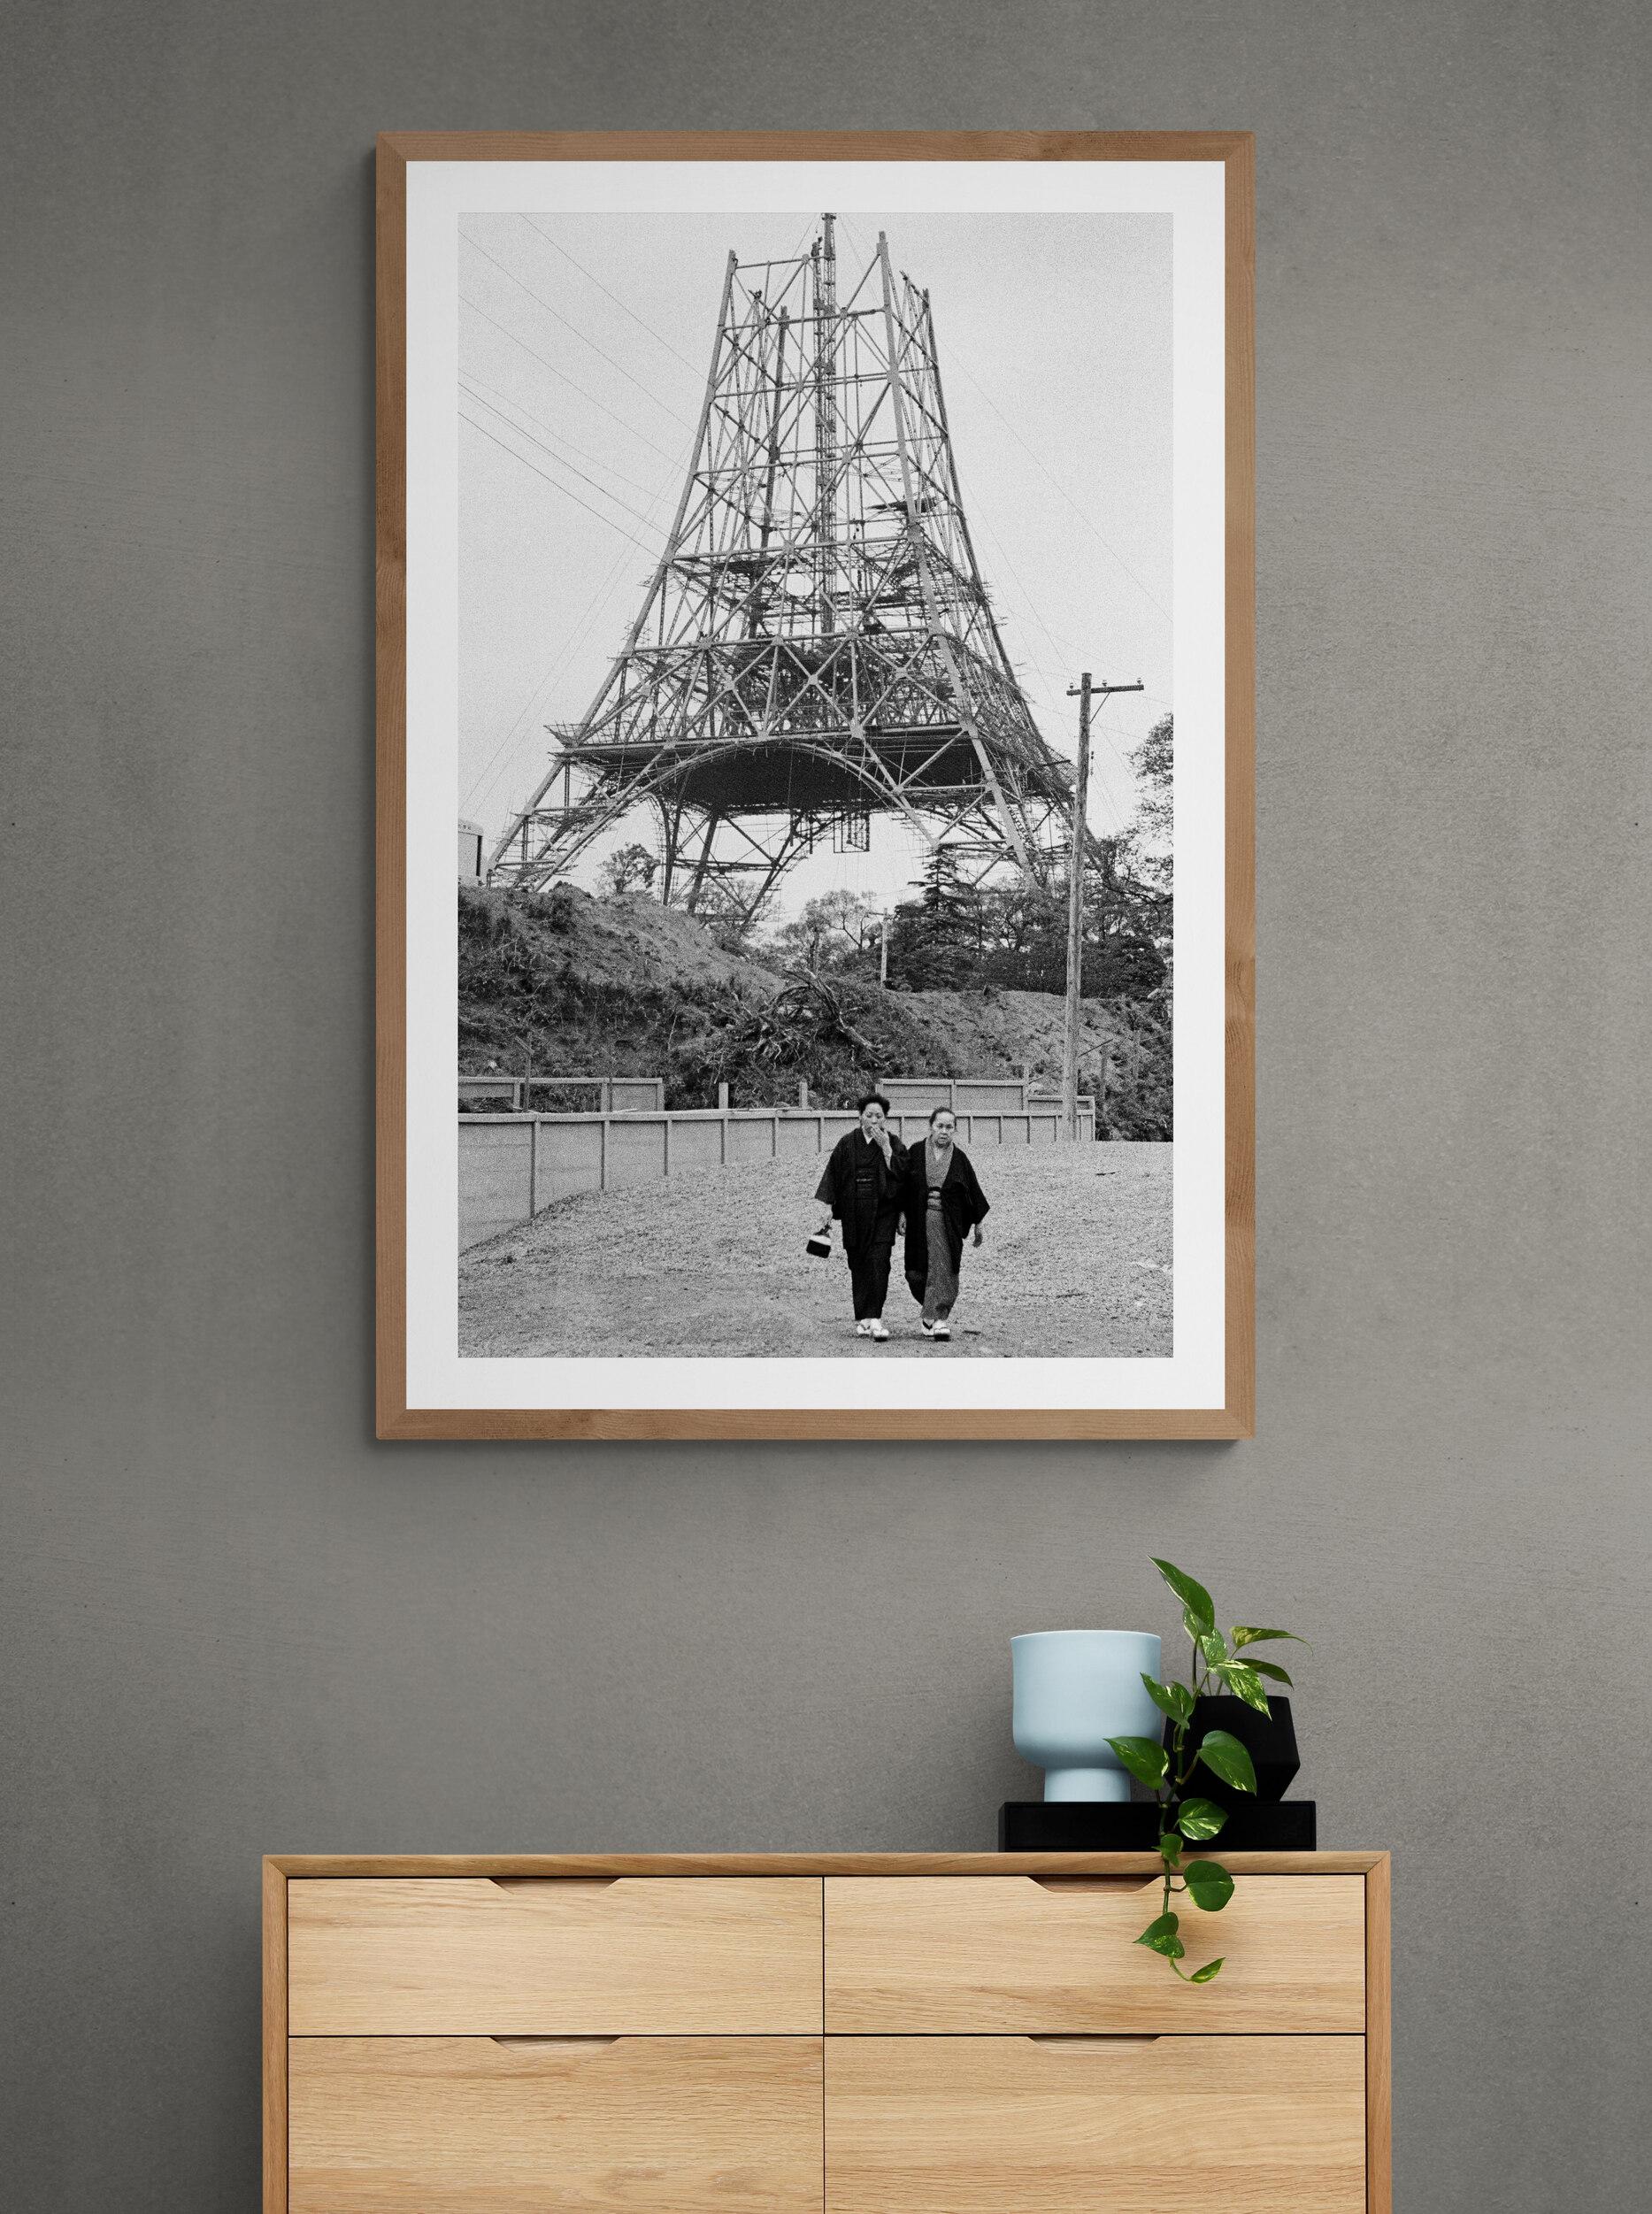 Artwork # 1 on 5 sold in limited edition in perfect condition 
Eiffel Tower, Tokyo - Japan
This photo was made in 1957, the negative was digitized during the artist's lifetime and the technical parameters (framing, contrast, light, etc.) was